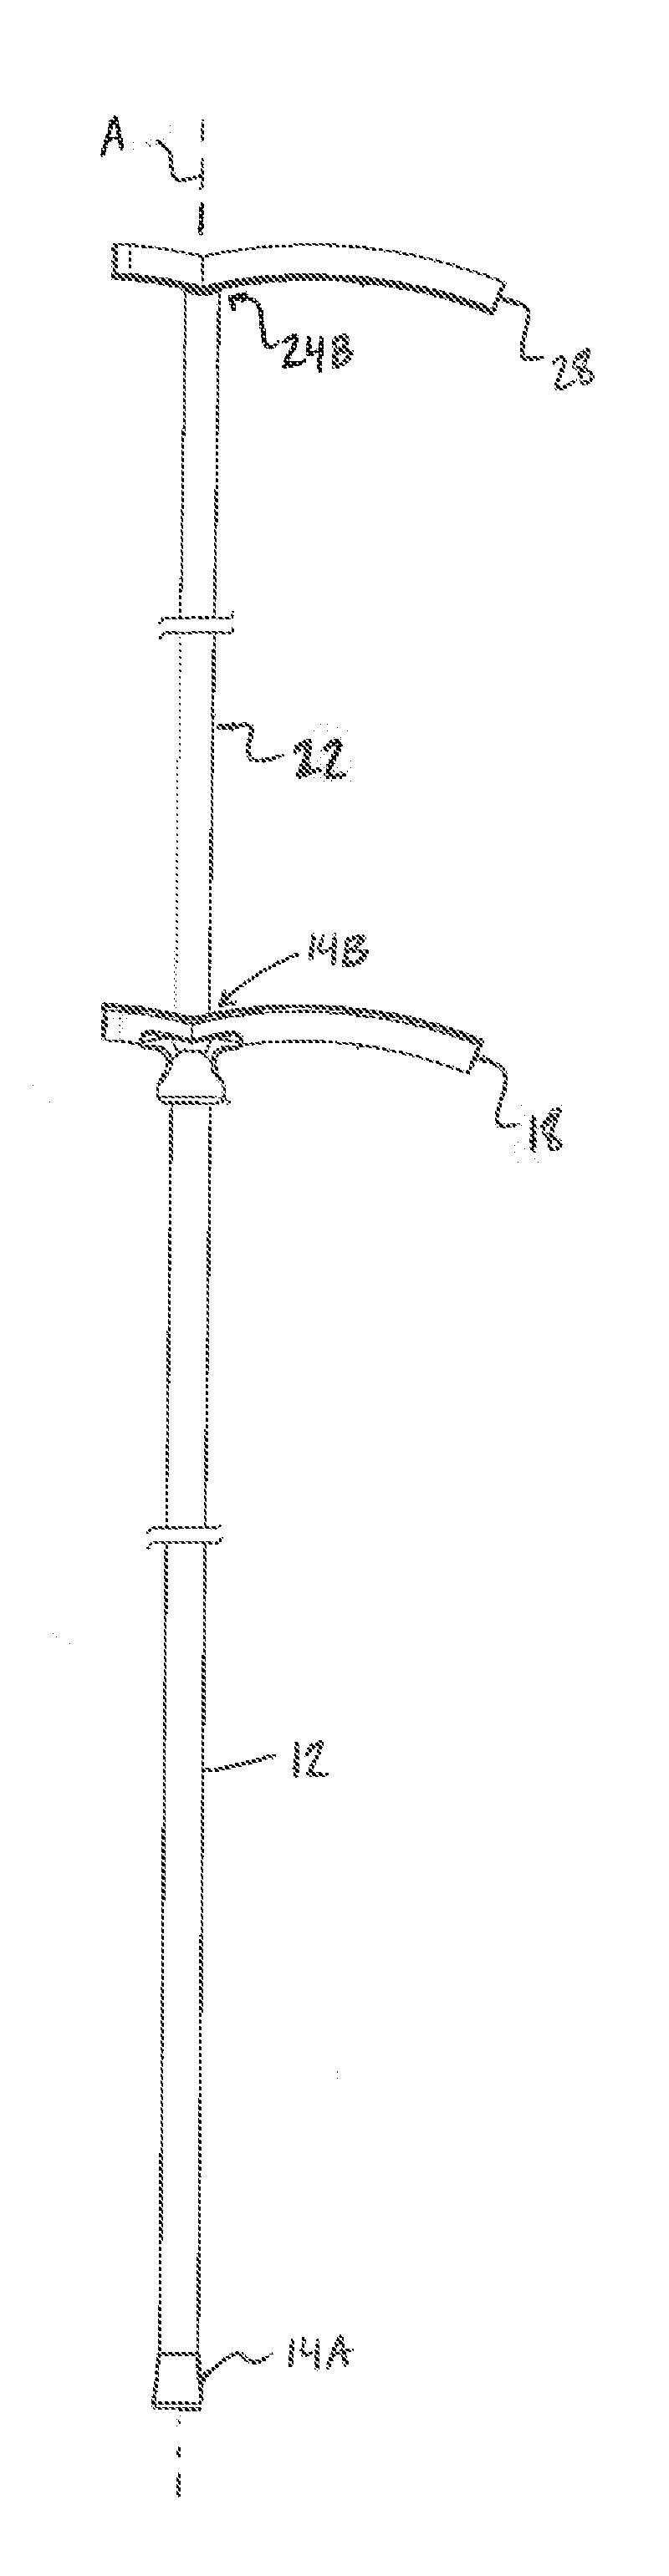 Apparatus for Aiding Mobility of a User